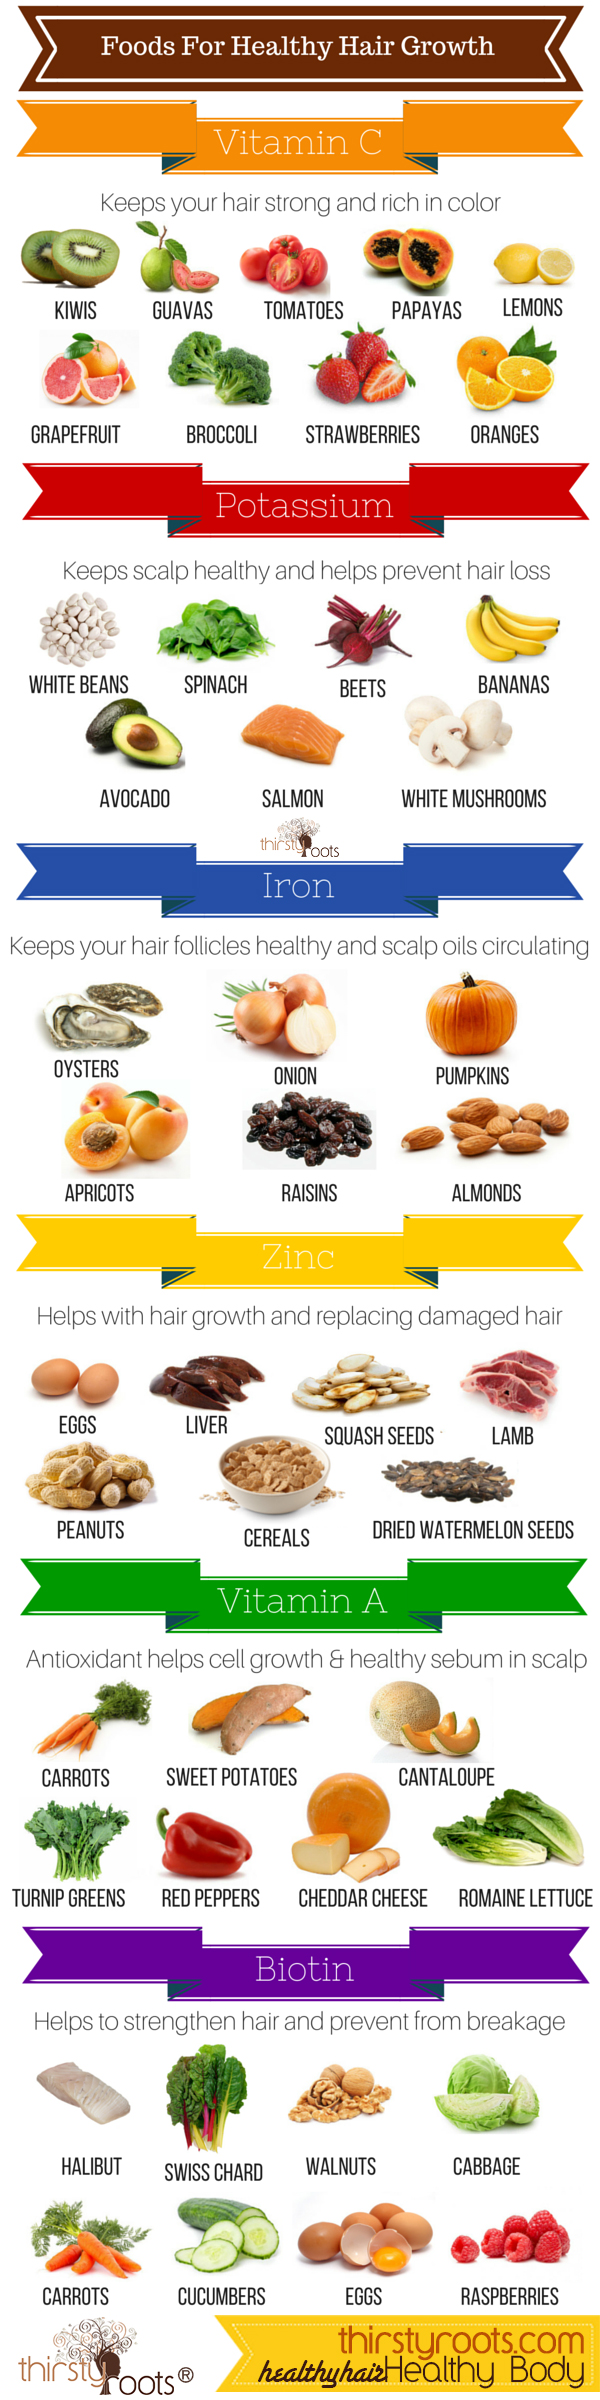 foods for healthy hair growth